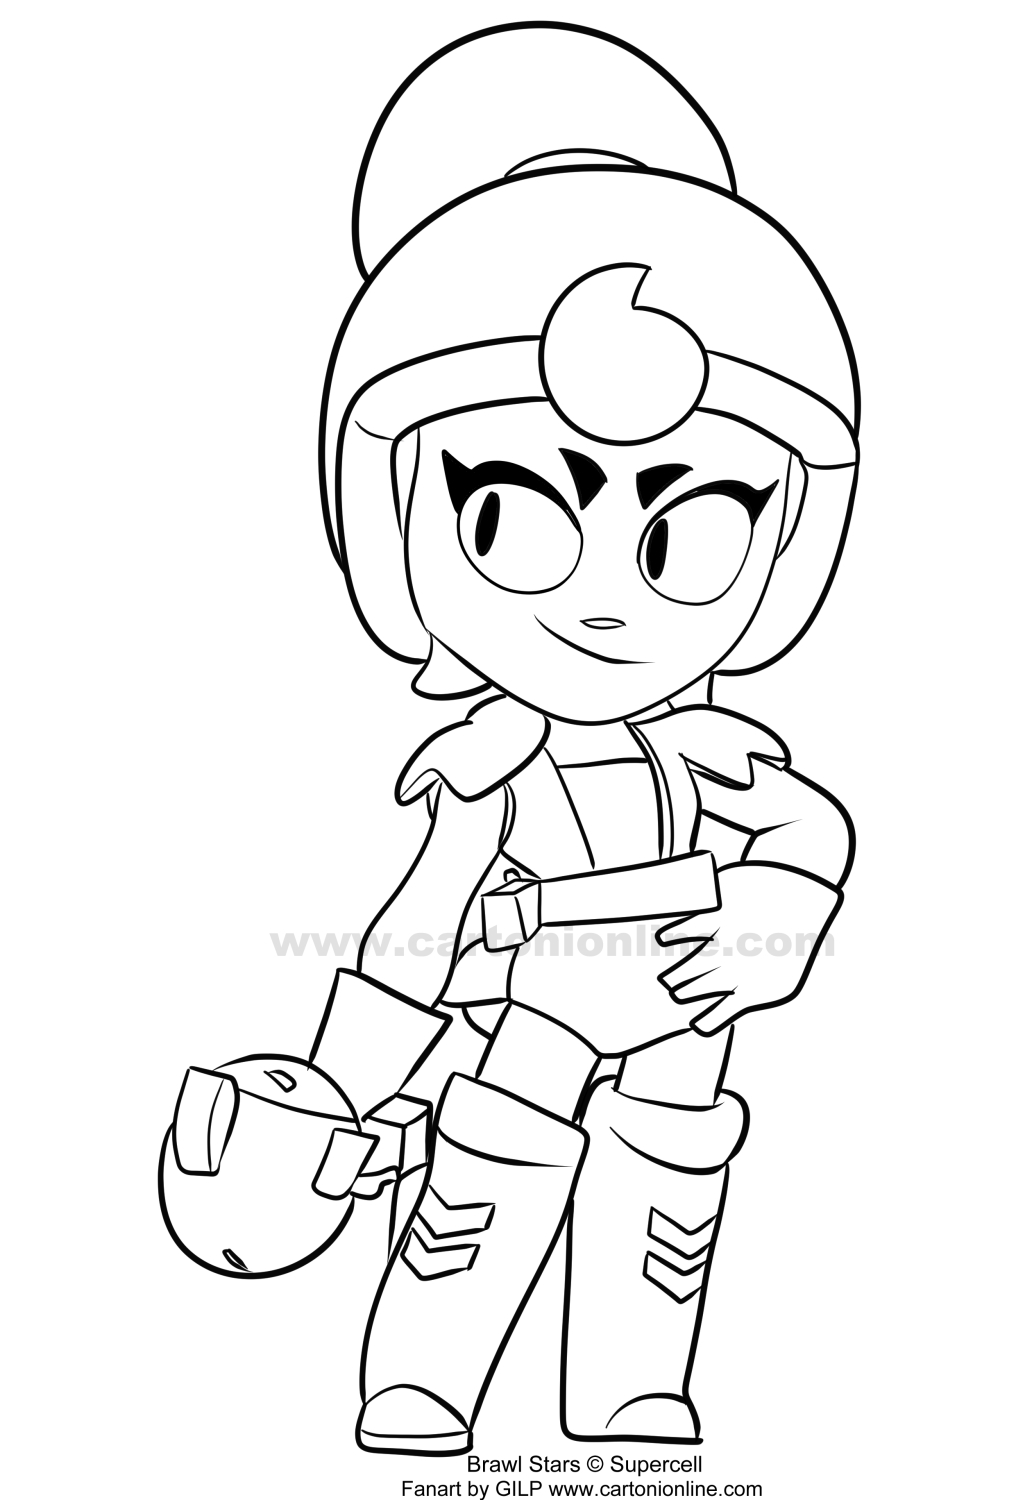 Janet 01 from Brawl Stars coloring page to print and coloring